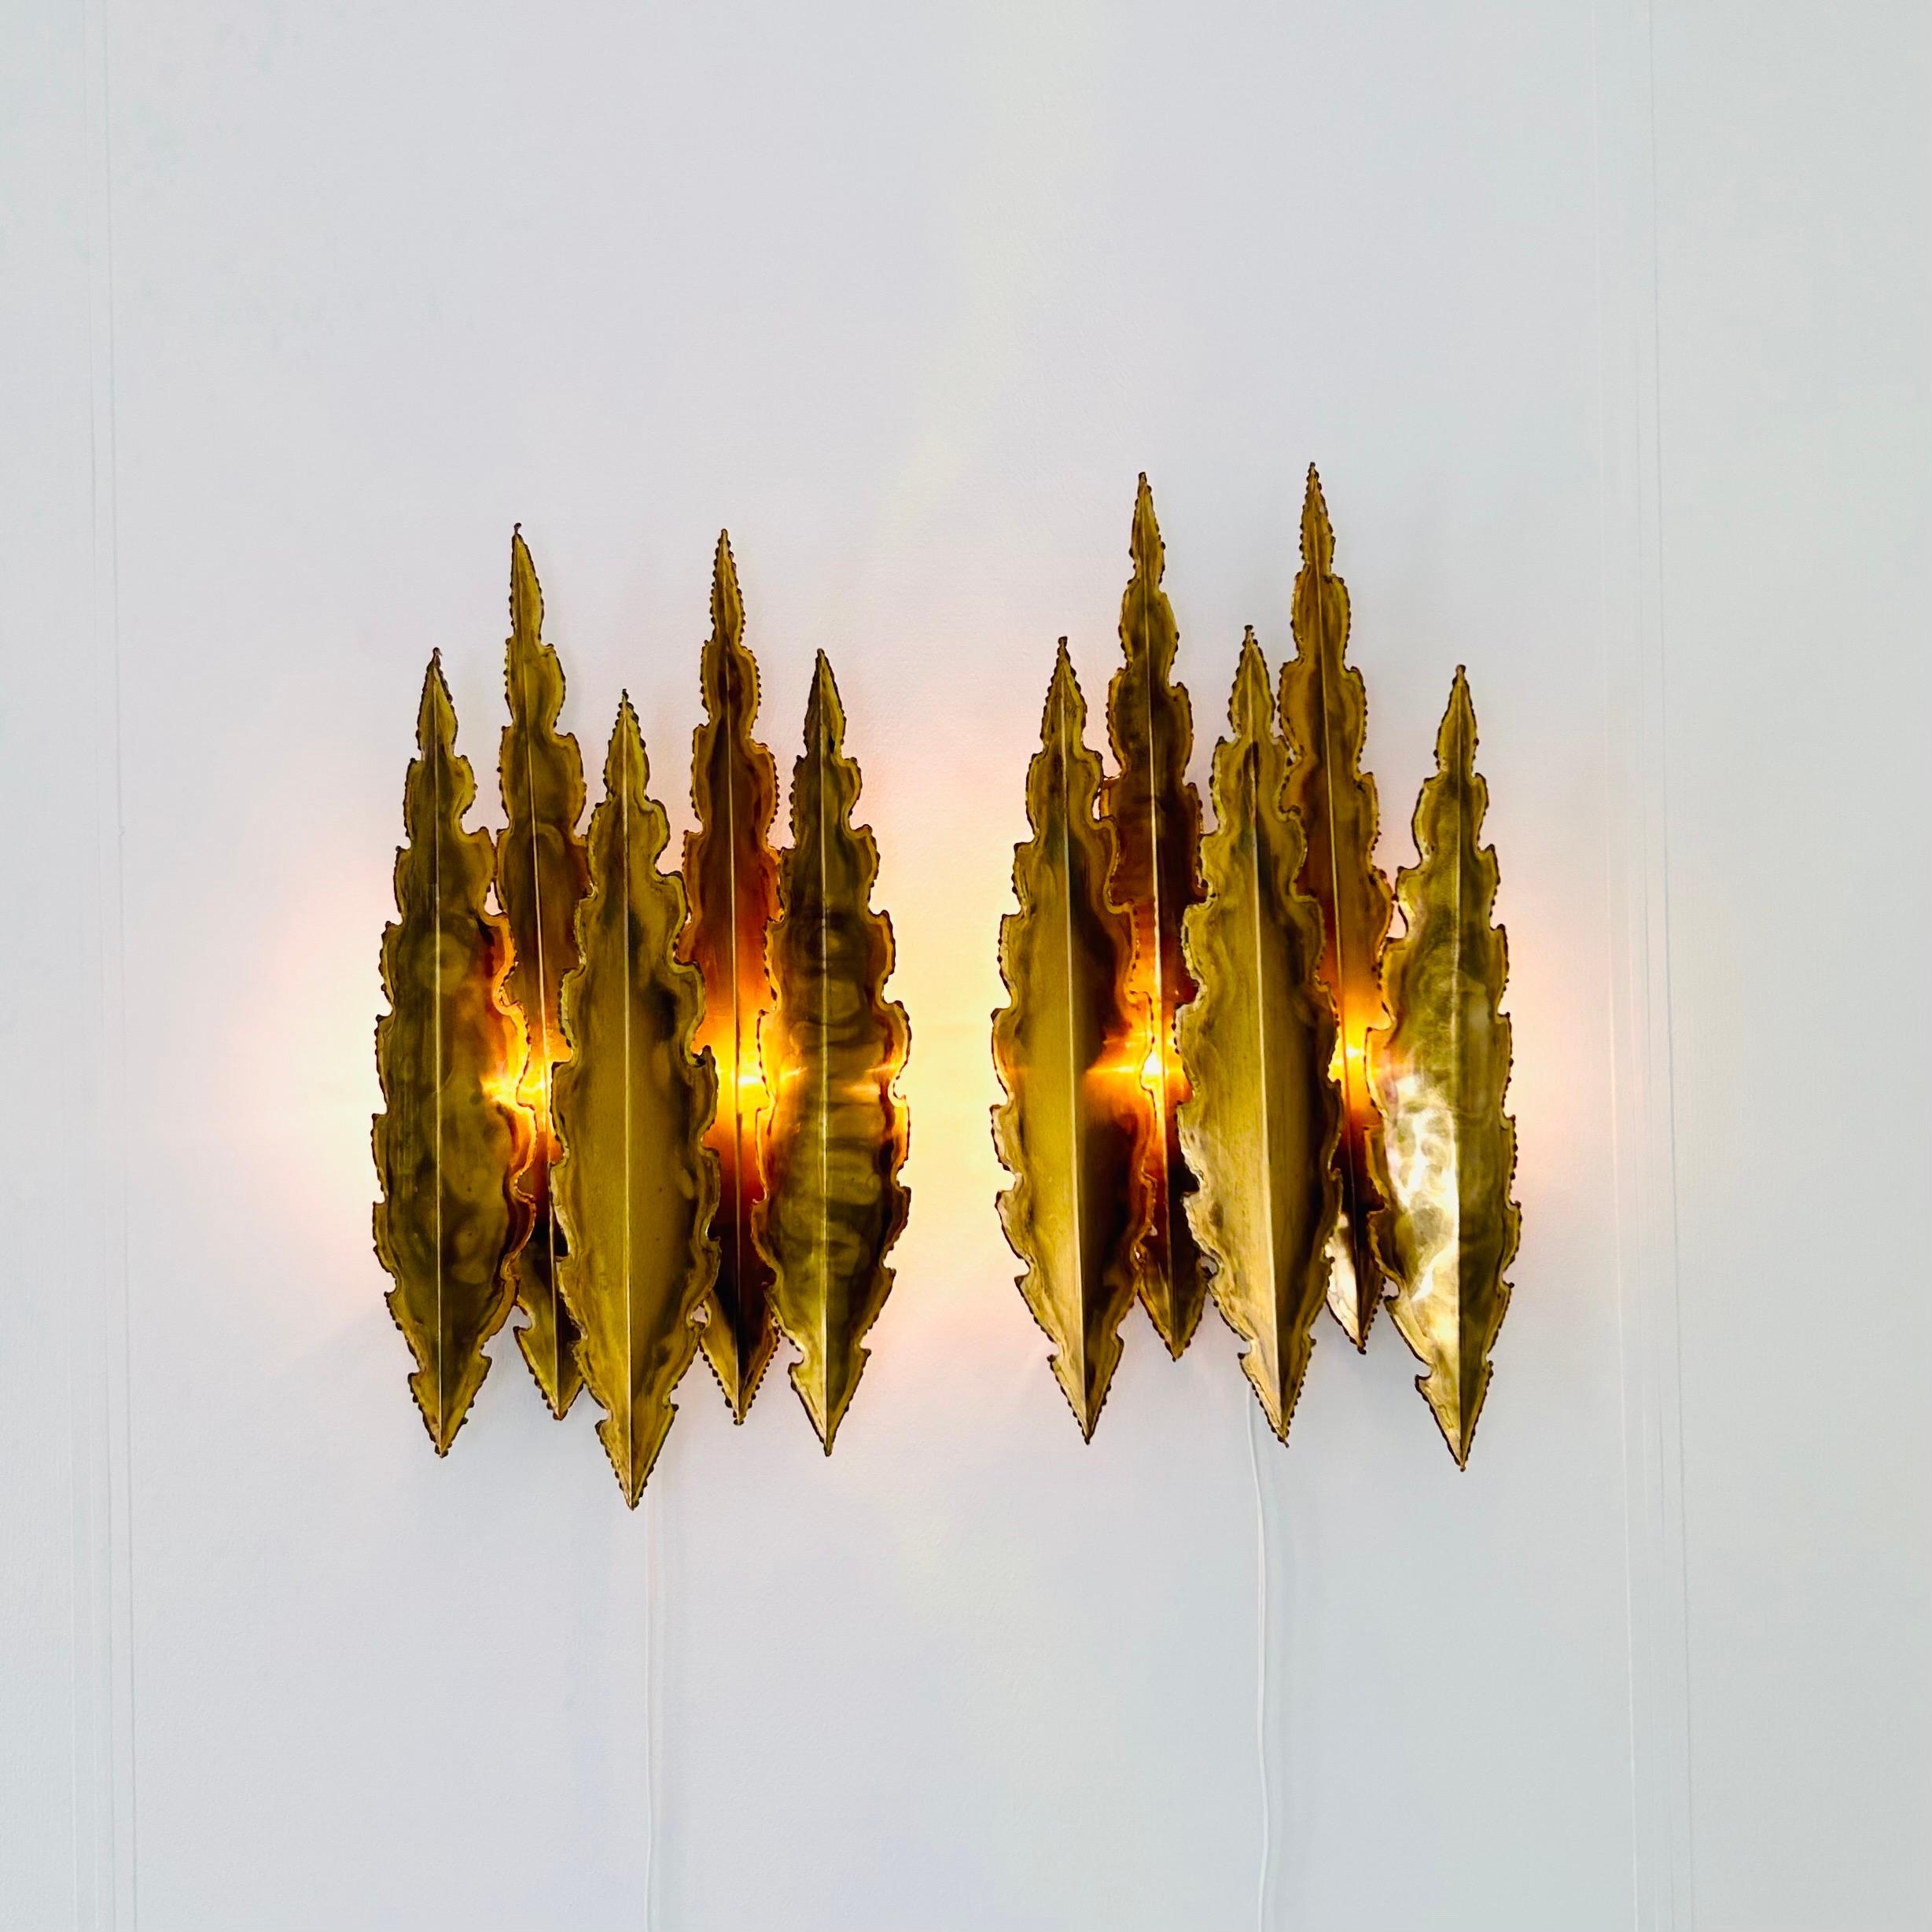 Brutalist Pair of Large Brass Wall Lamps by Svend Aage Holm Sorensen, 1960s, Denmark